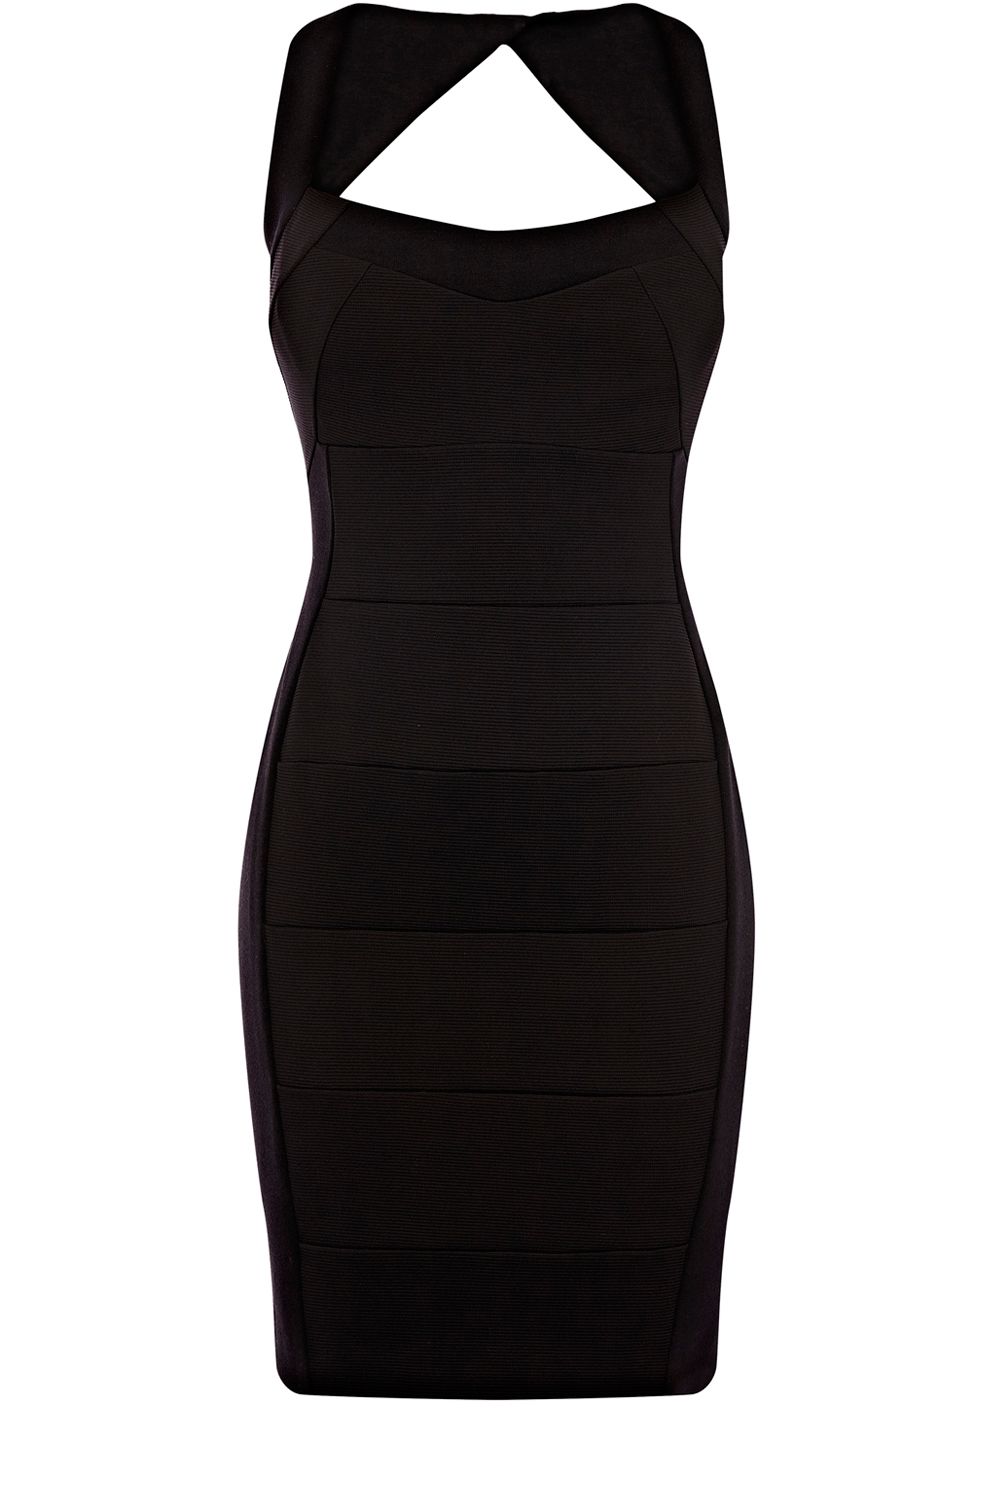 Oasis Sexy Bandage Dress in Black | Lyst